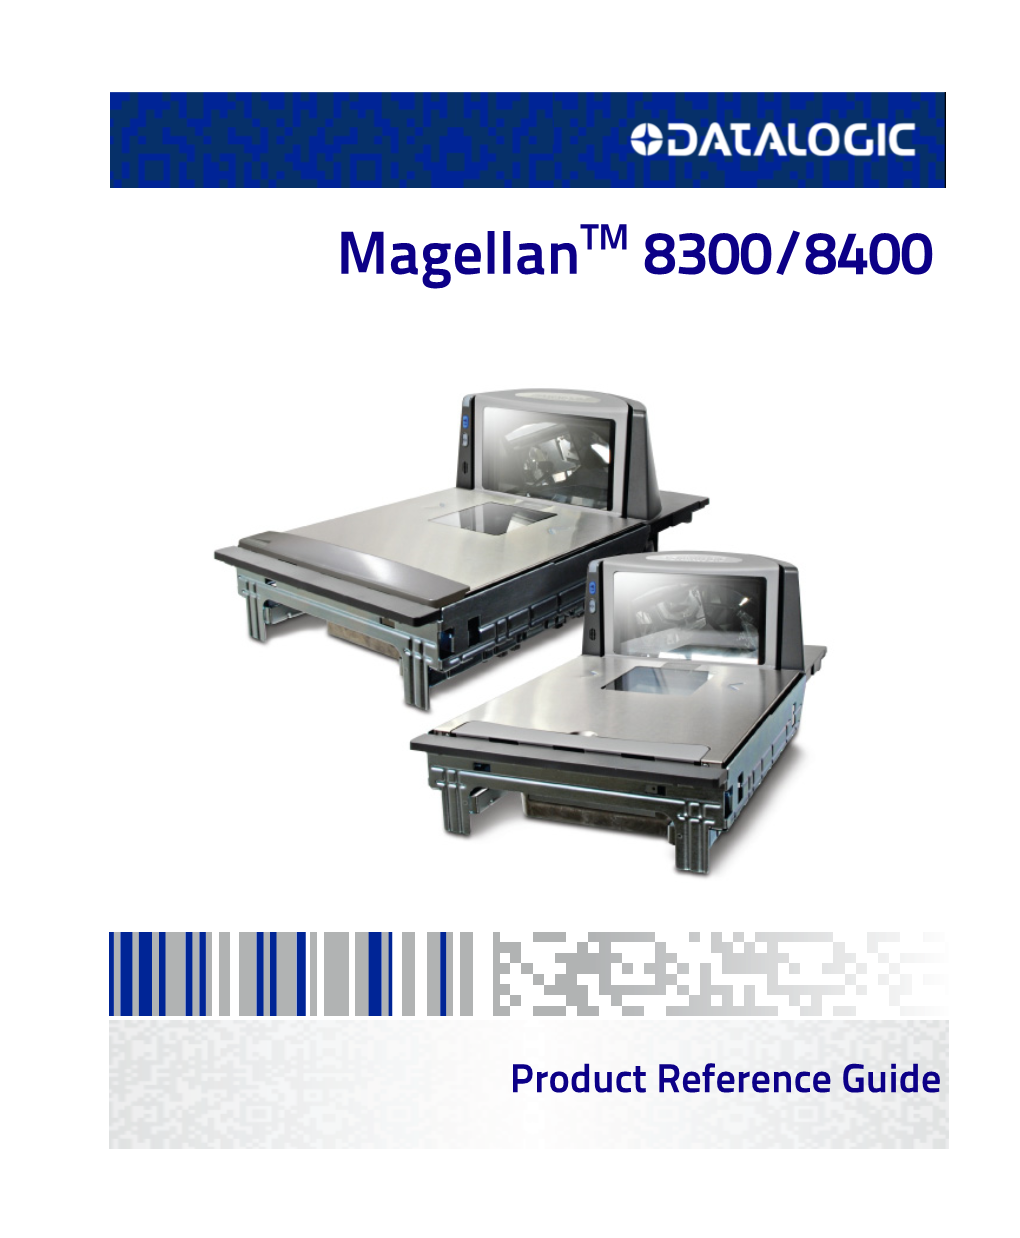 Manual Be Published, You Can Acquire Printed Versions by Contacting Your Datalogic Repre- Sentative